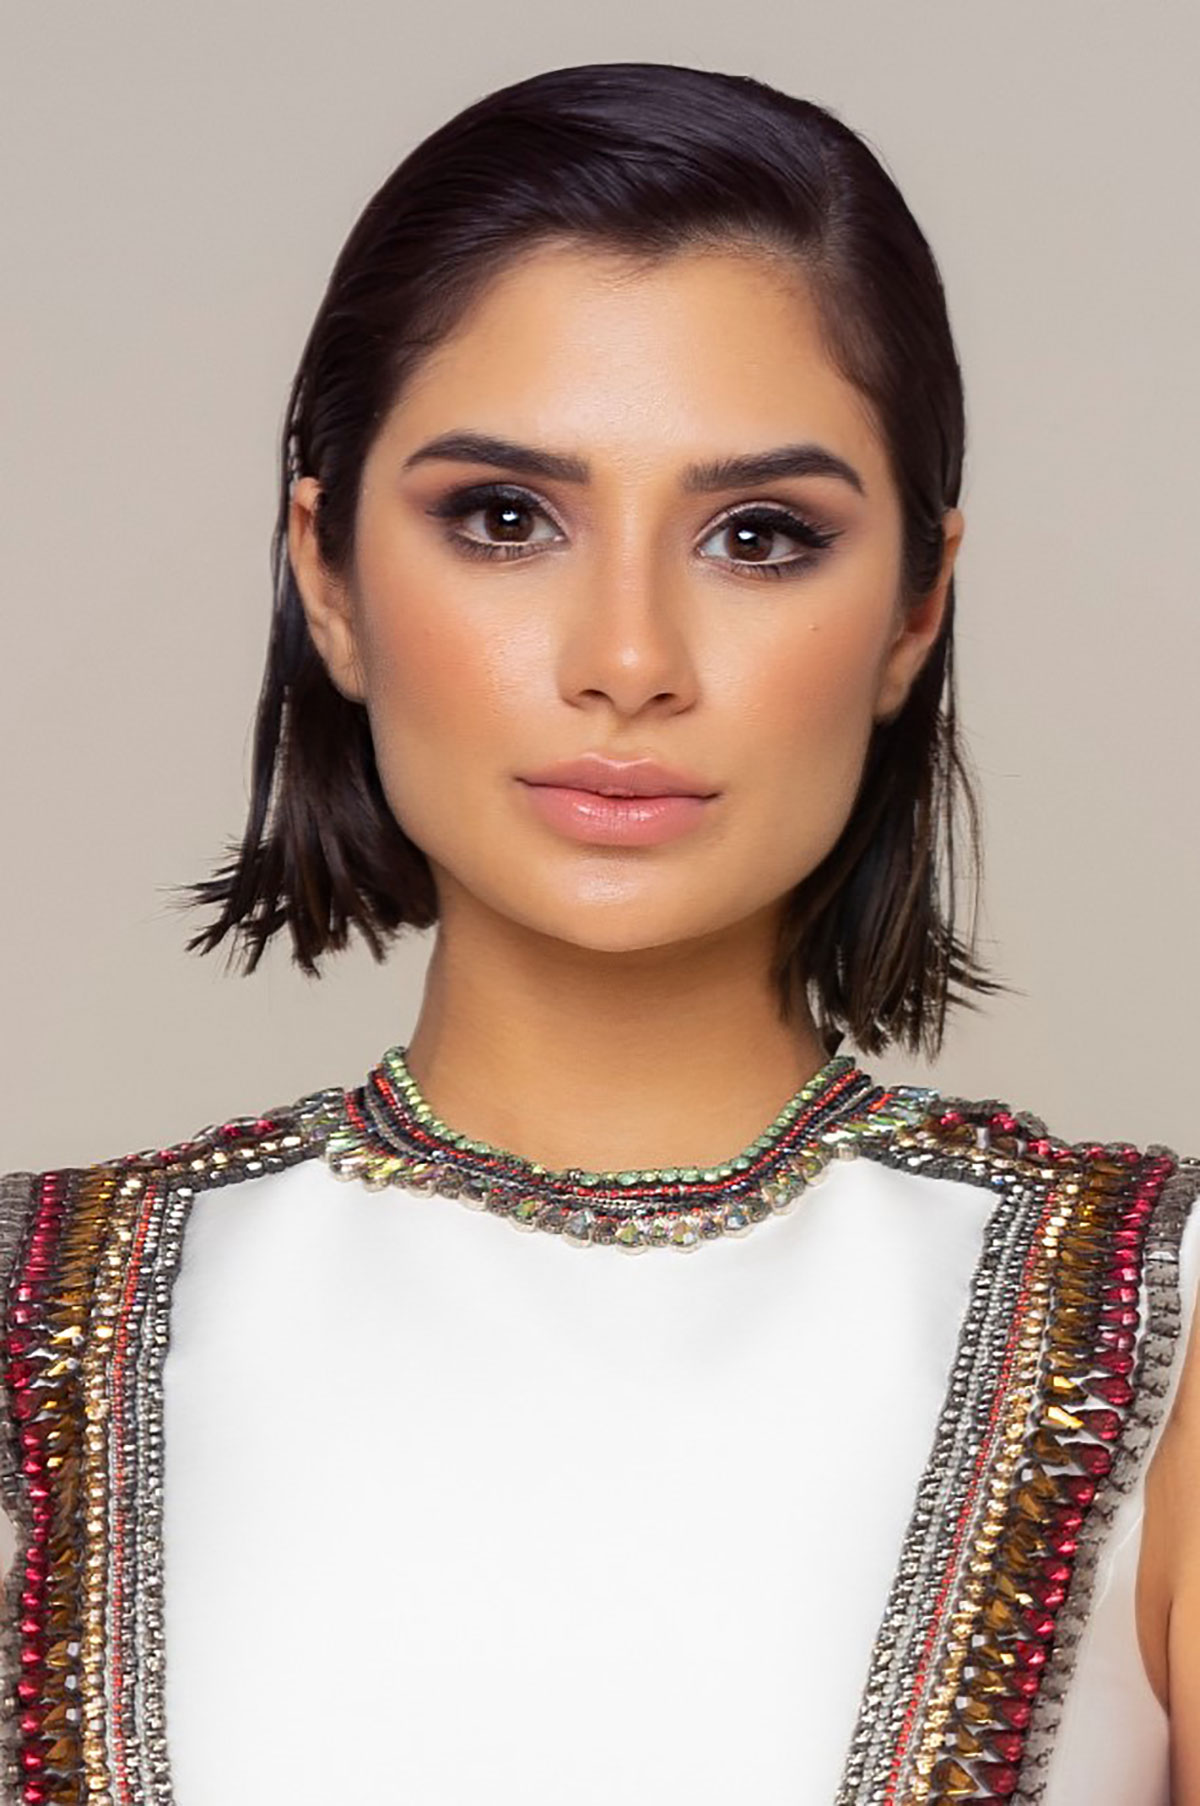 Actress and Activist Diane Guerrero Wants You to Vote - Modern Wellness ...